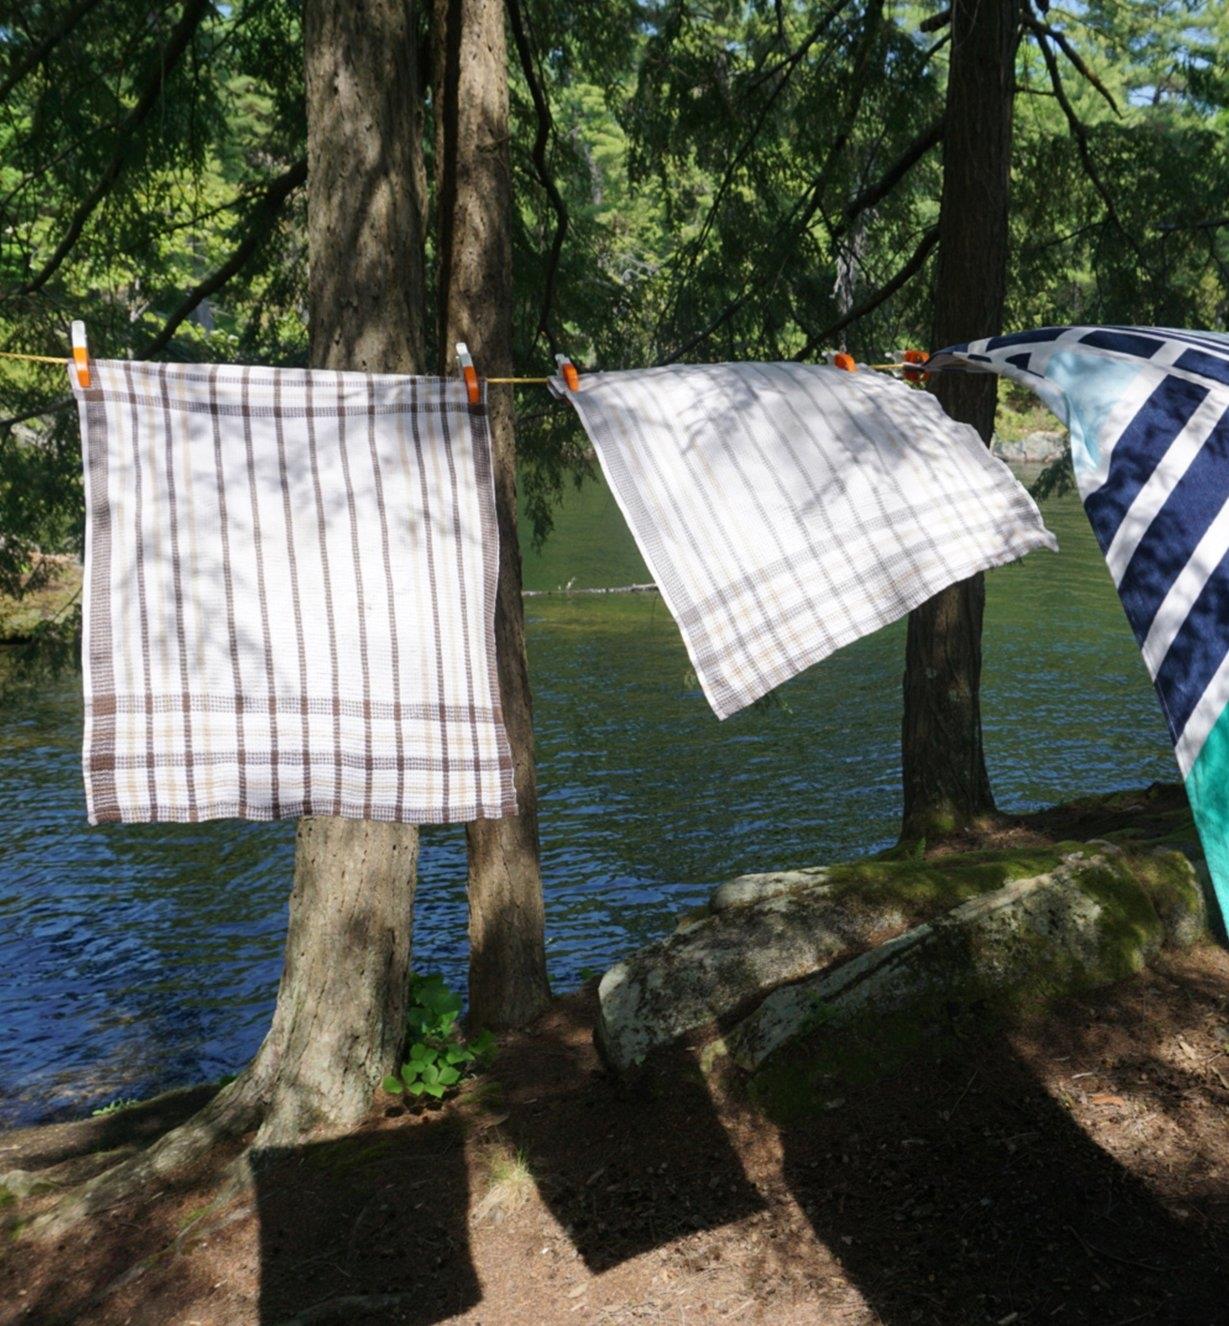 FixClip Clothespins holding towels on a clothesline in the woods by a river